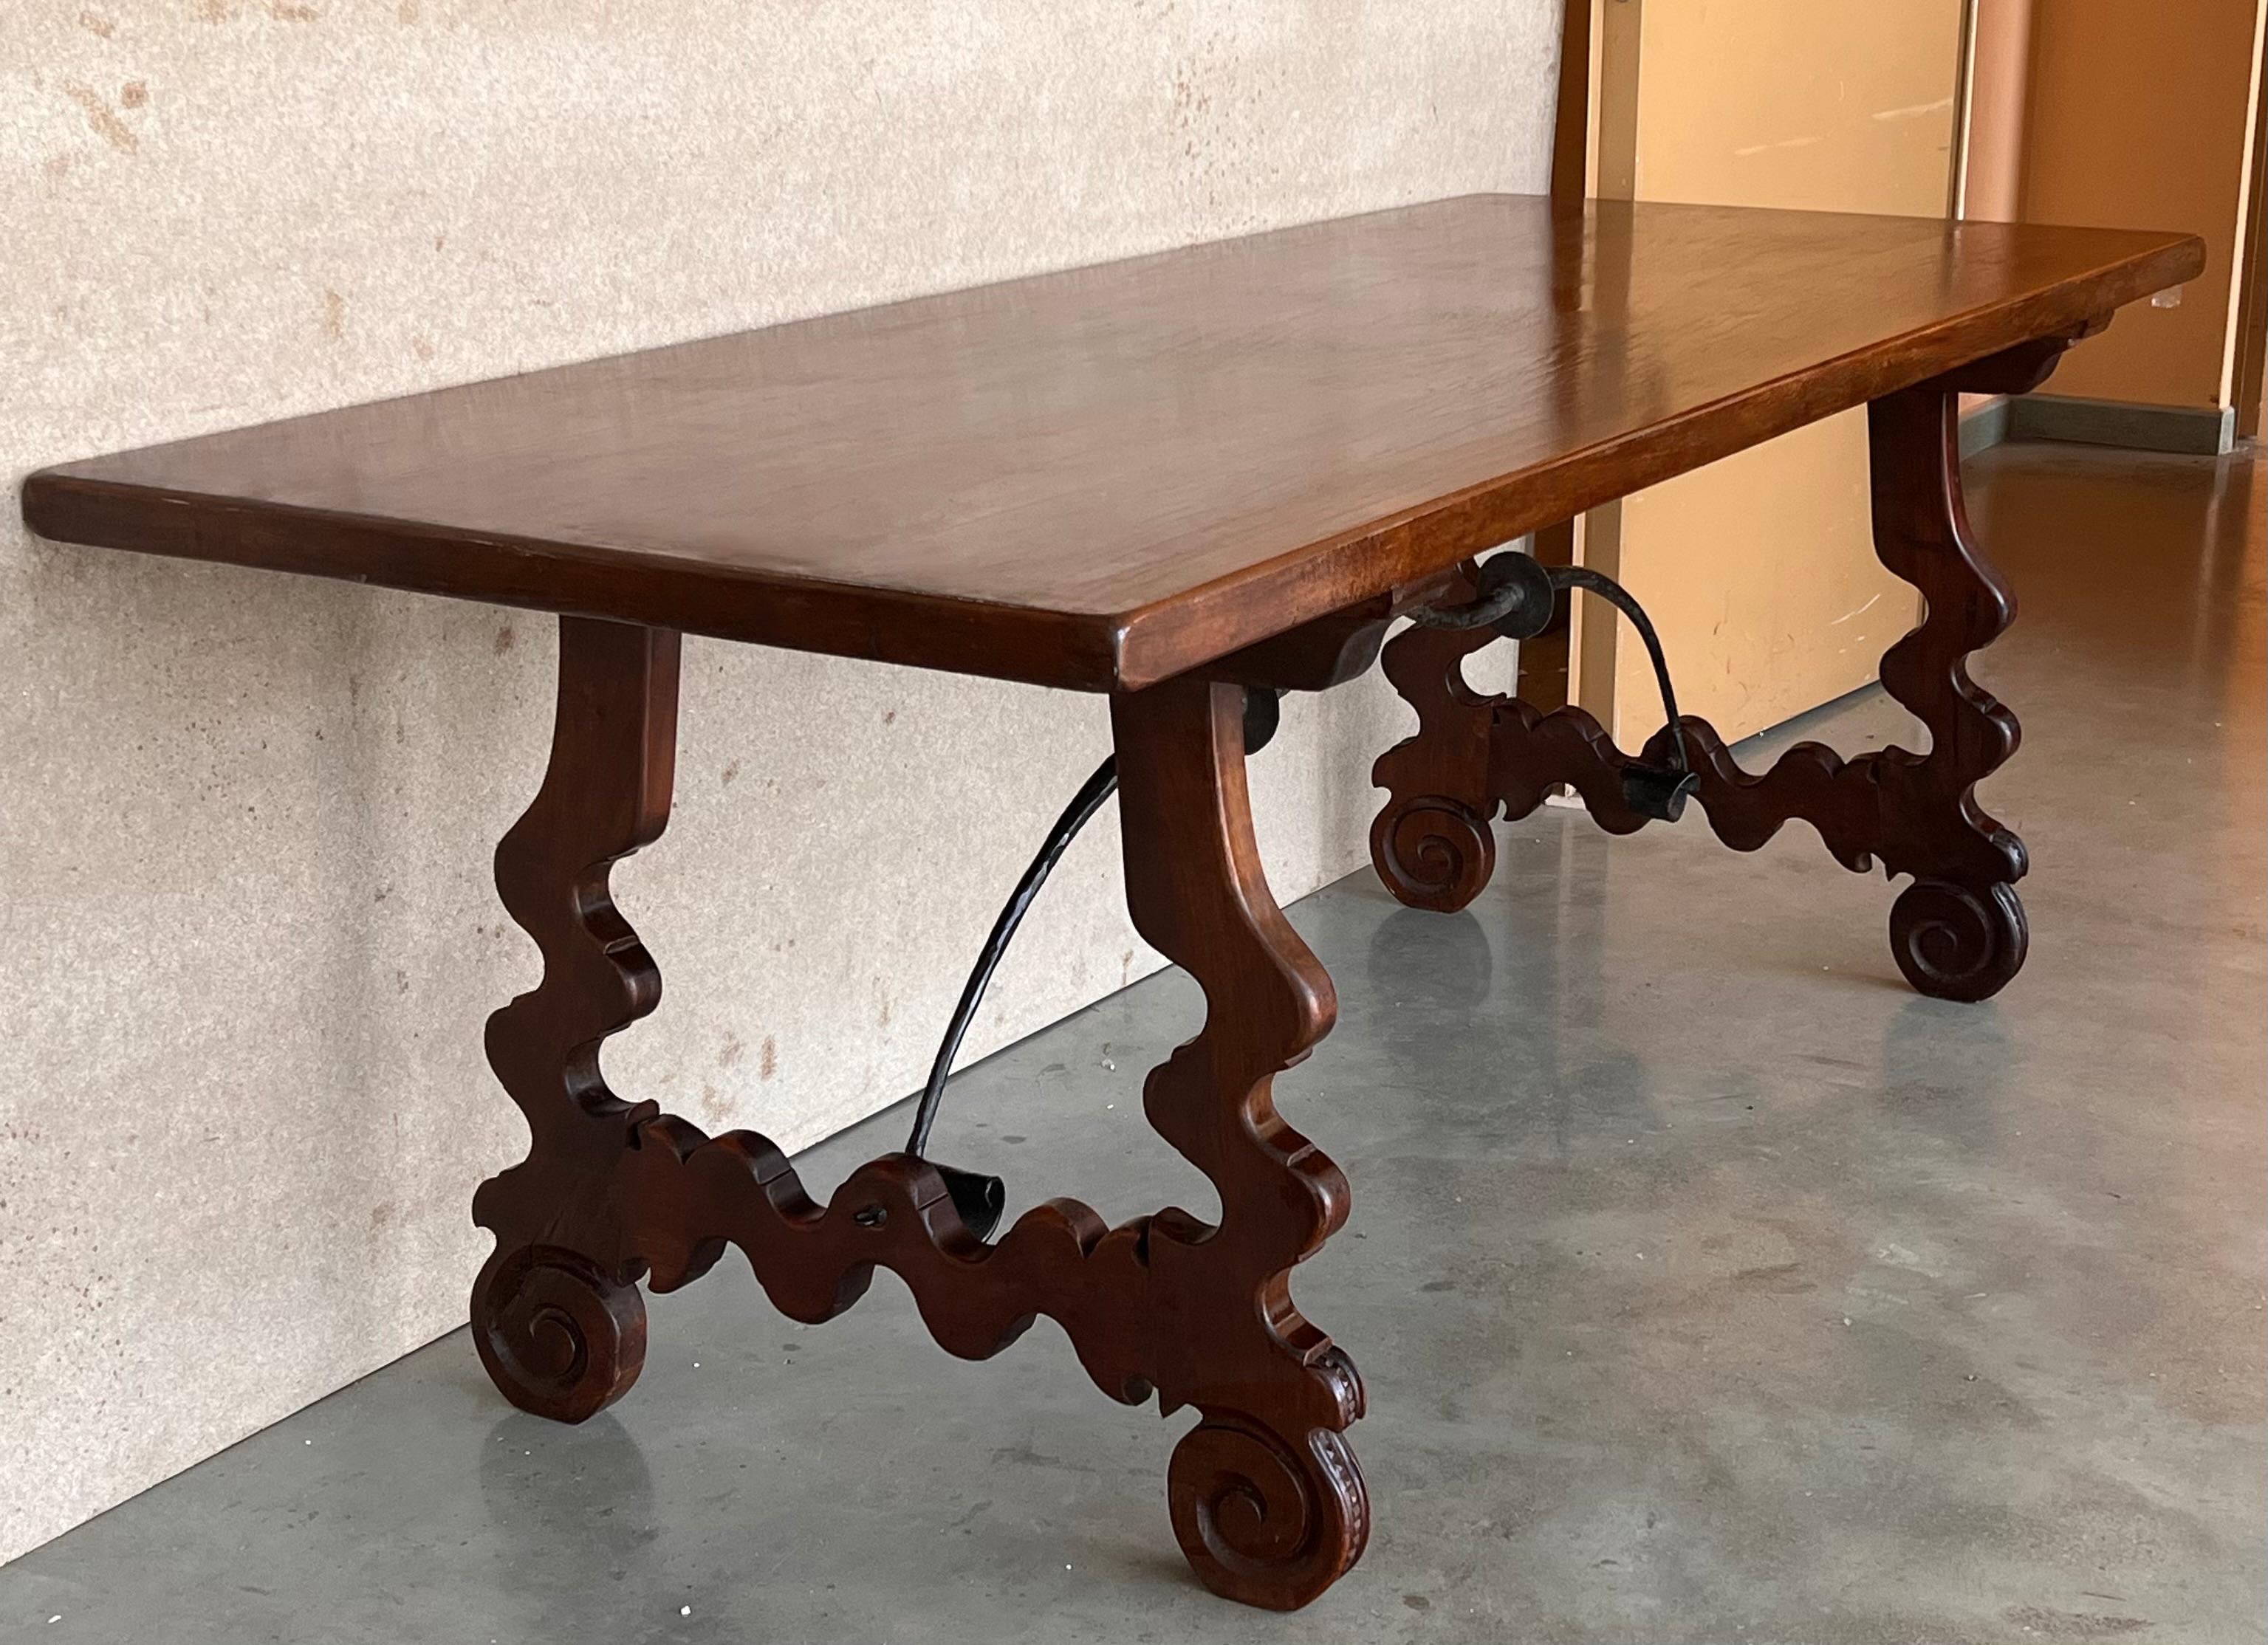 20th Century Spanish Baroque Carved Walnut Lyre Legs Trestle Dining Farm Table For Sale 1